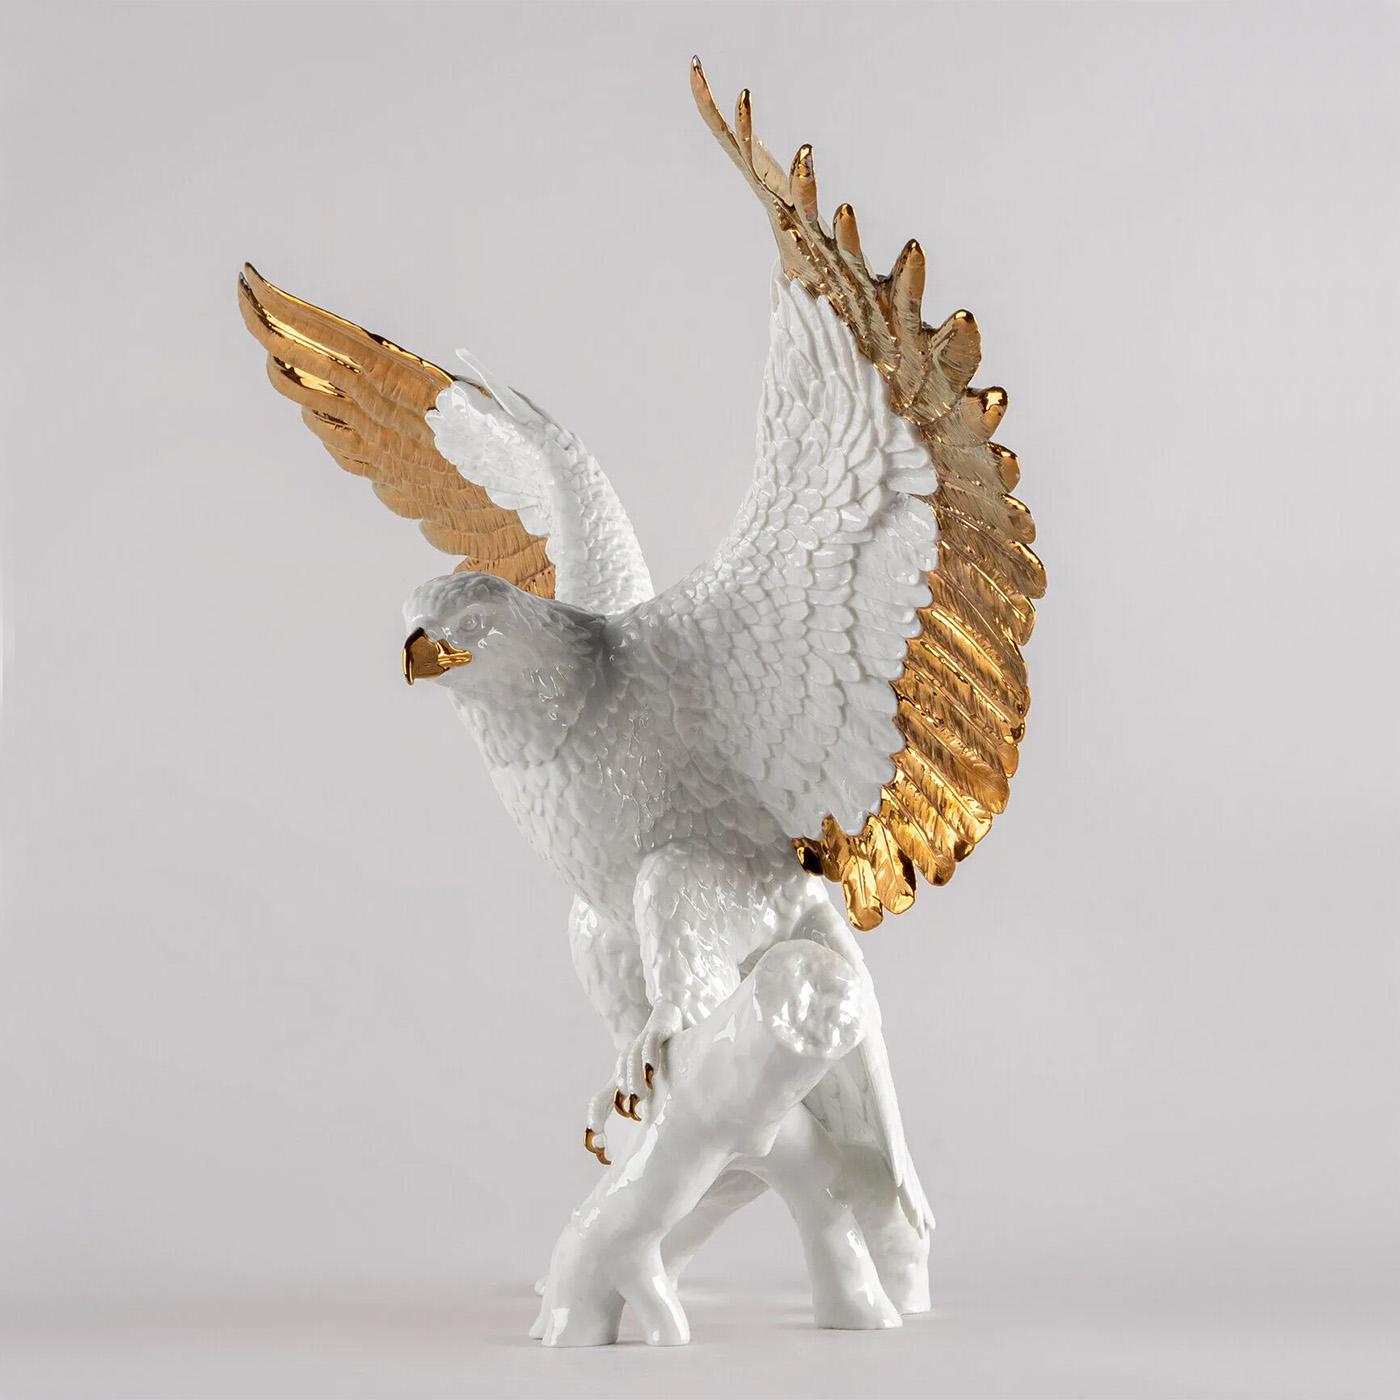 Sculpture White Eagle with all structure in porcelain 
in shiny finish and in glazed copper lustrous finish.